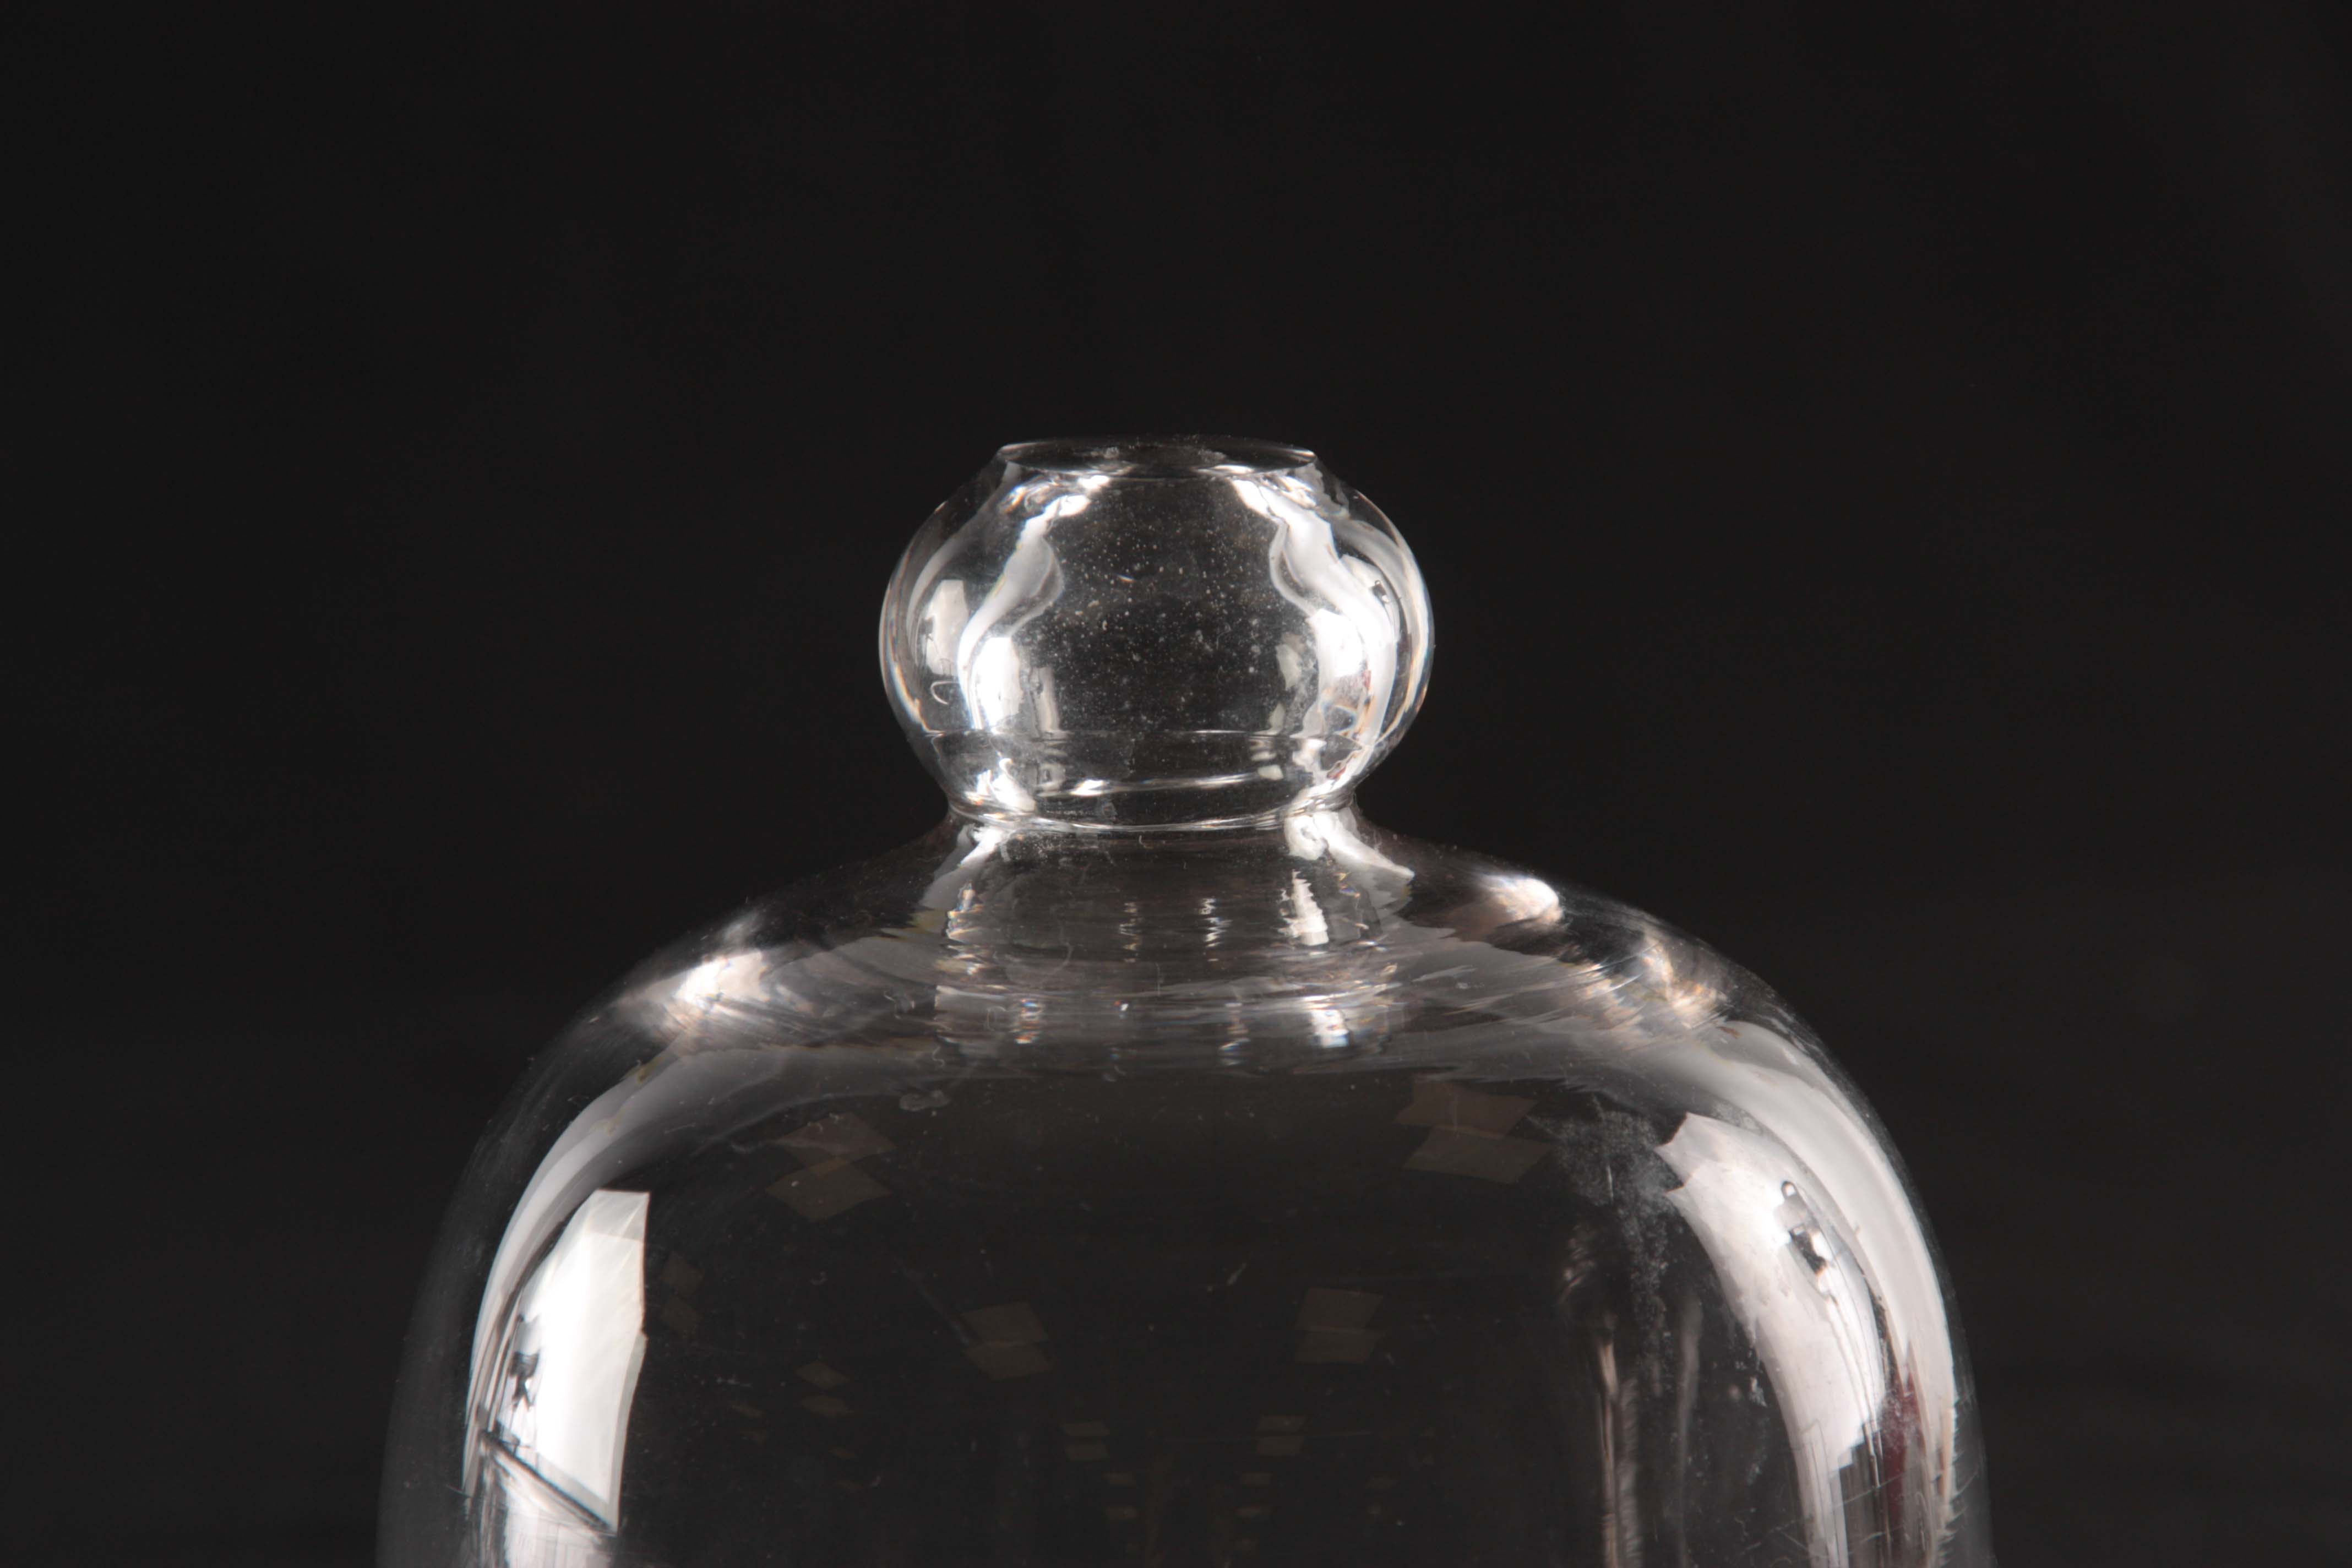 A GEORGIAN ETCHED GLASS BOWL ON STAND 10cm high, 13cm diameter, TOGETHER WITH AN ASSOCIATED GLASS - Image 4 of 5